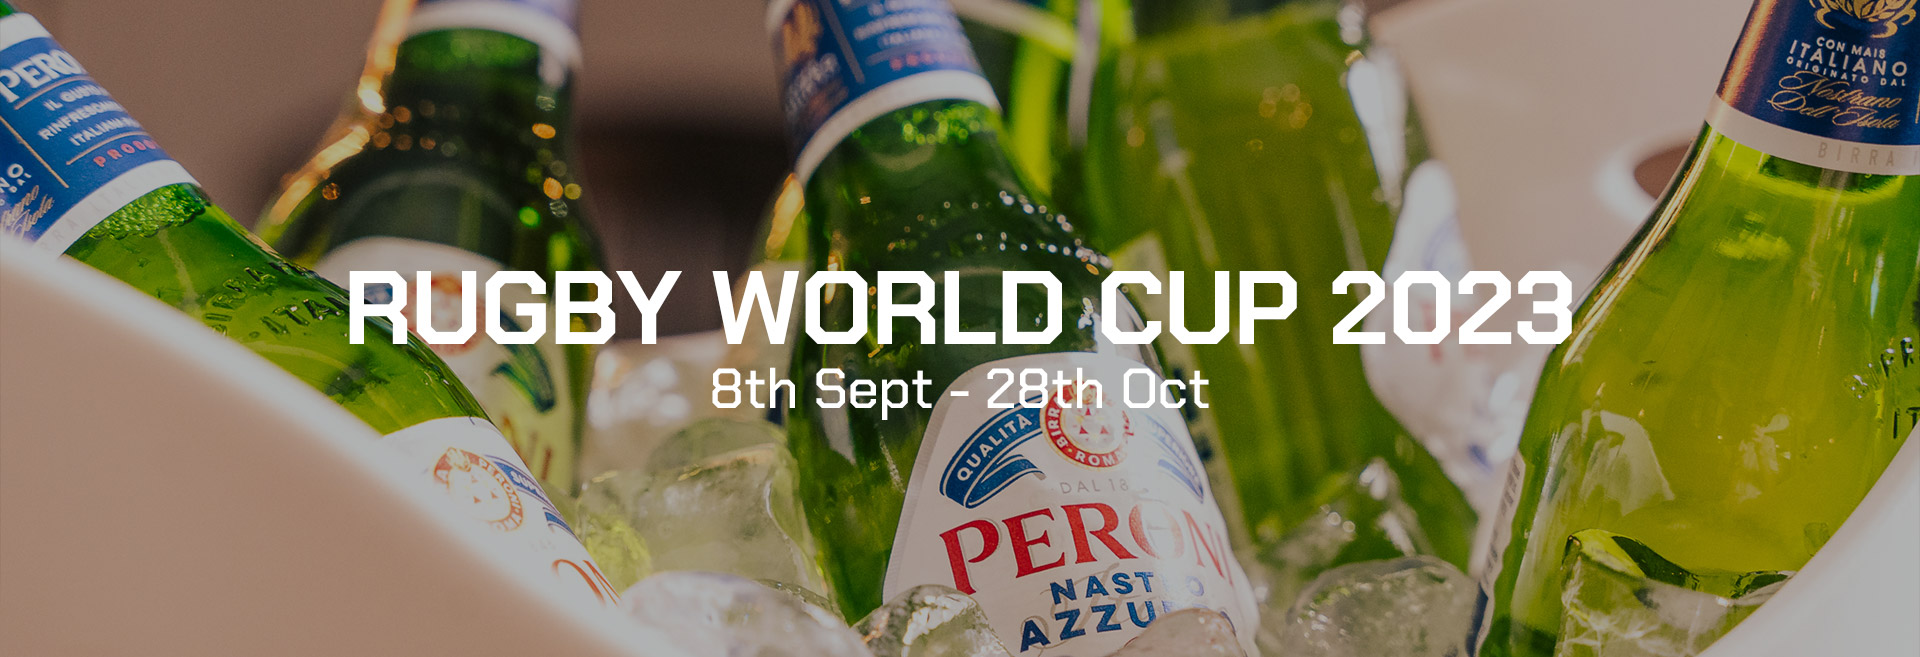 Watch the Rugby World Cup at The North Star